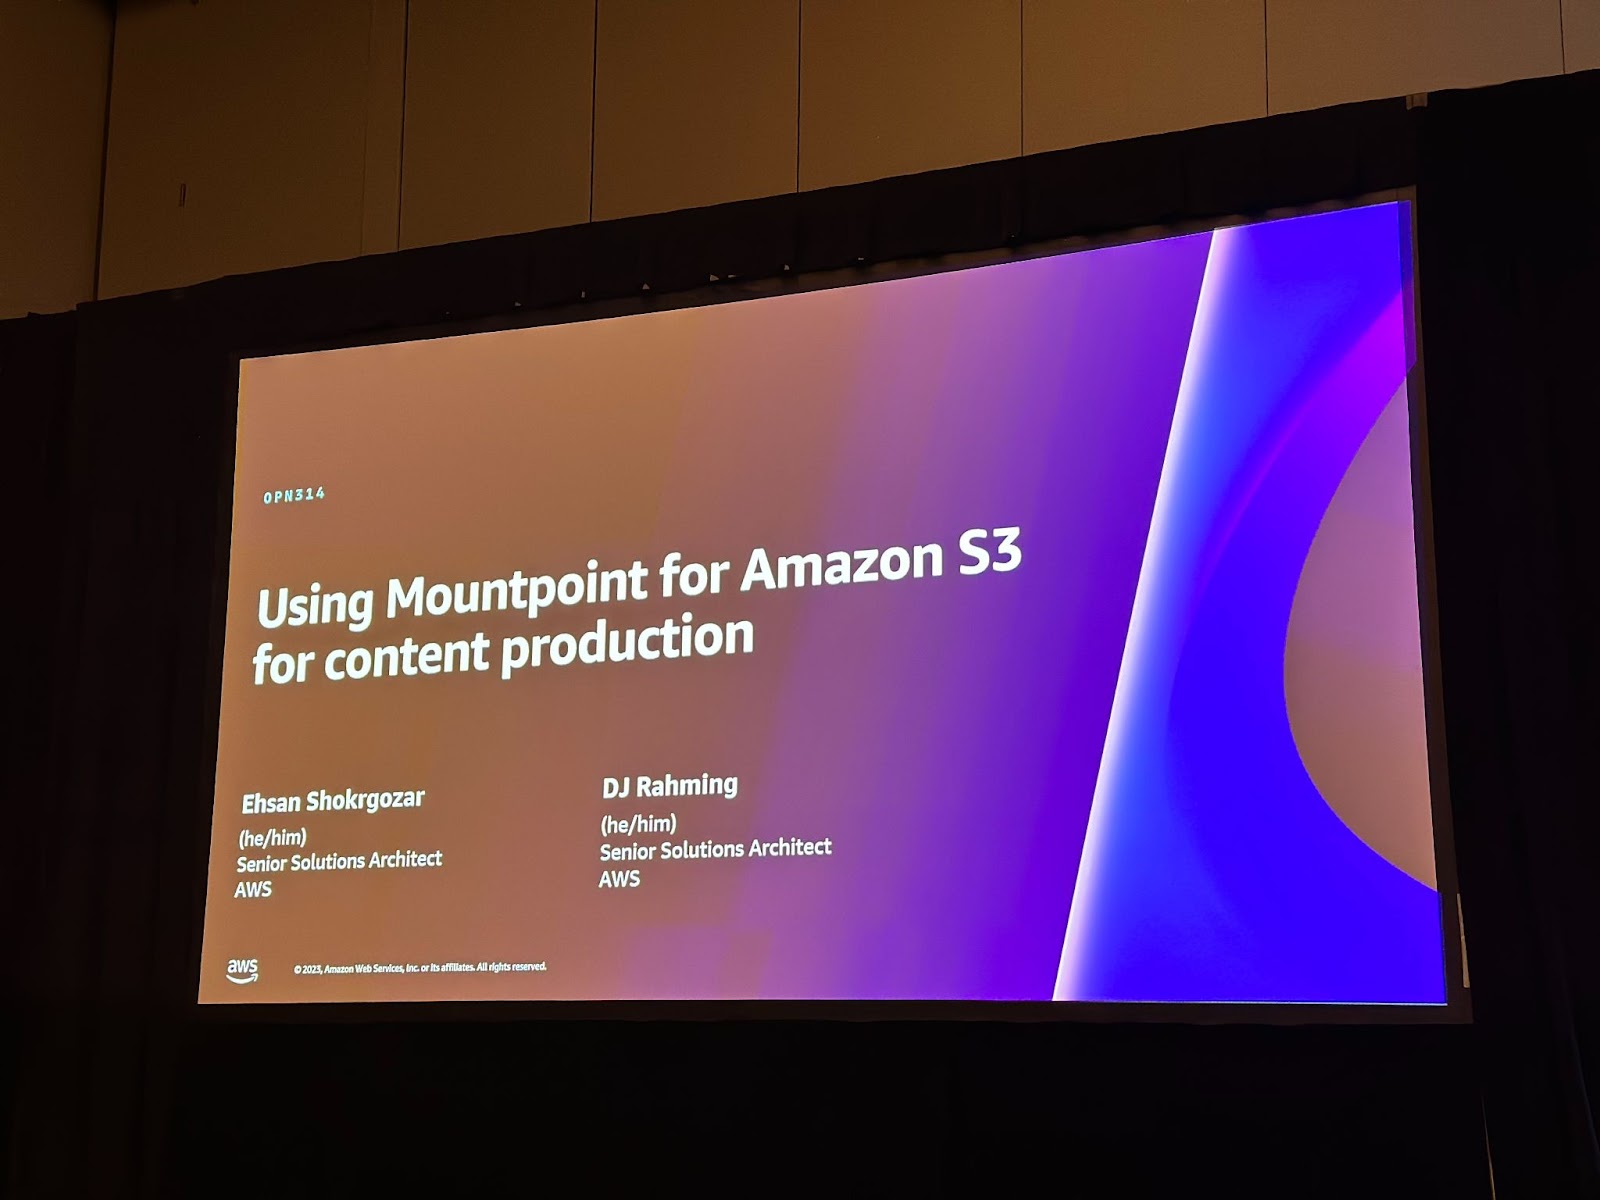 Using Mountpoint for Amazon S3 for content production